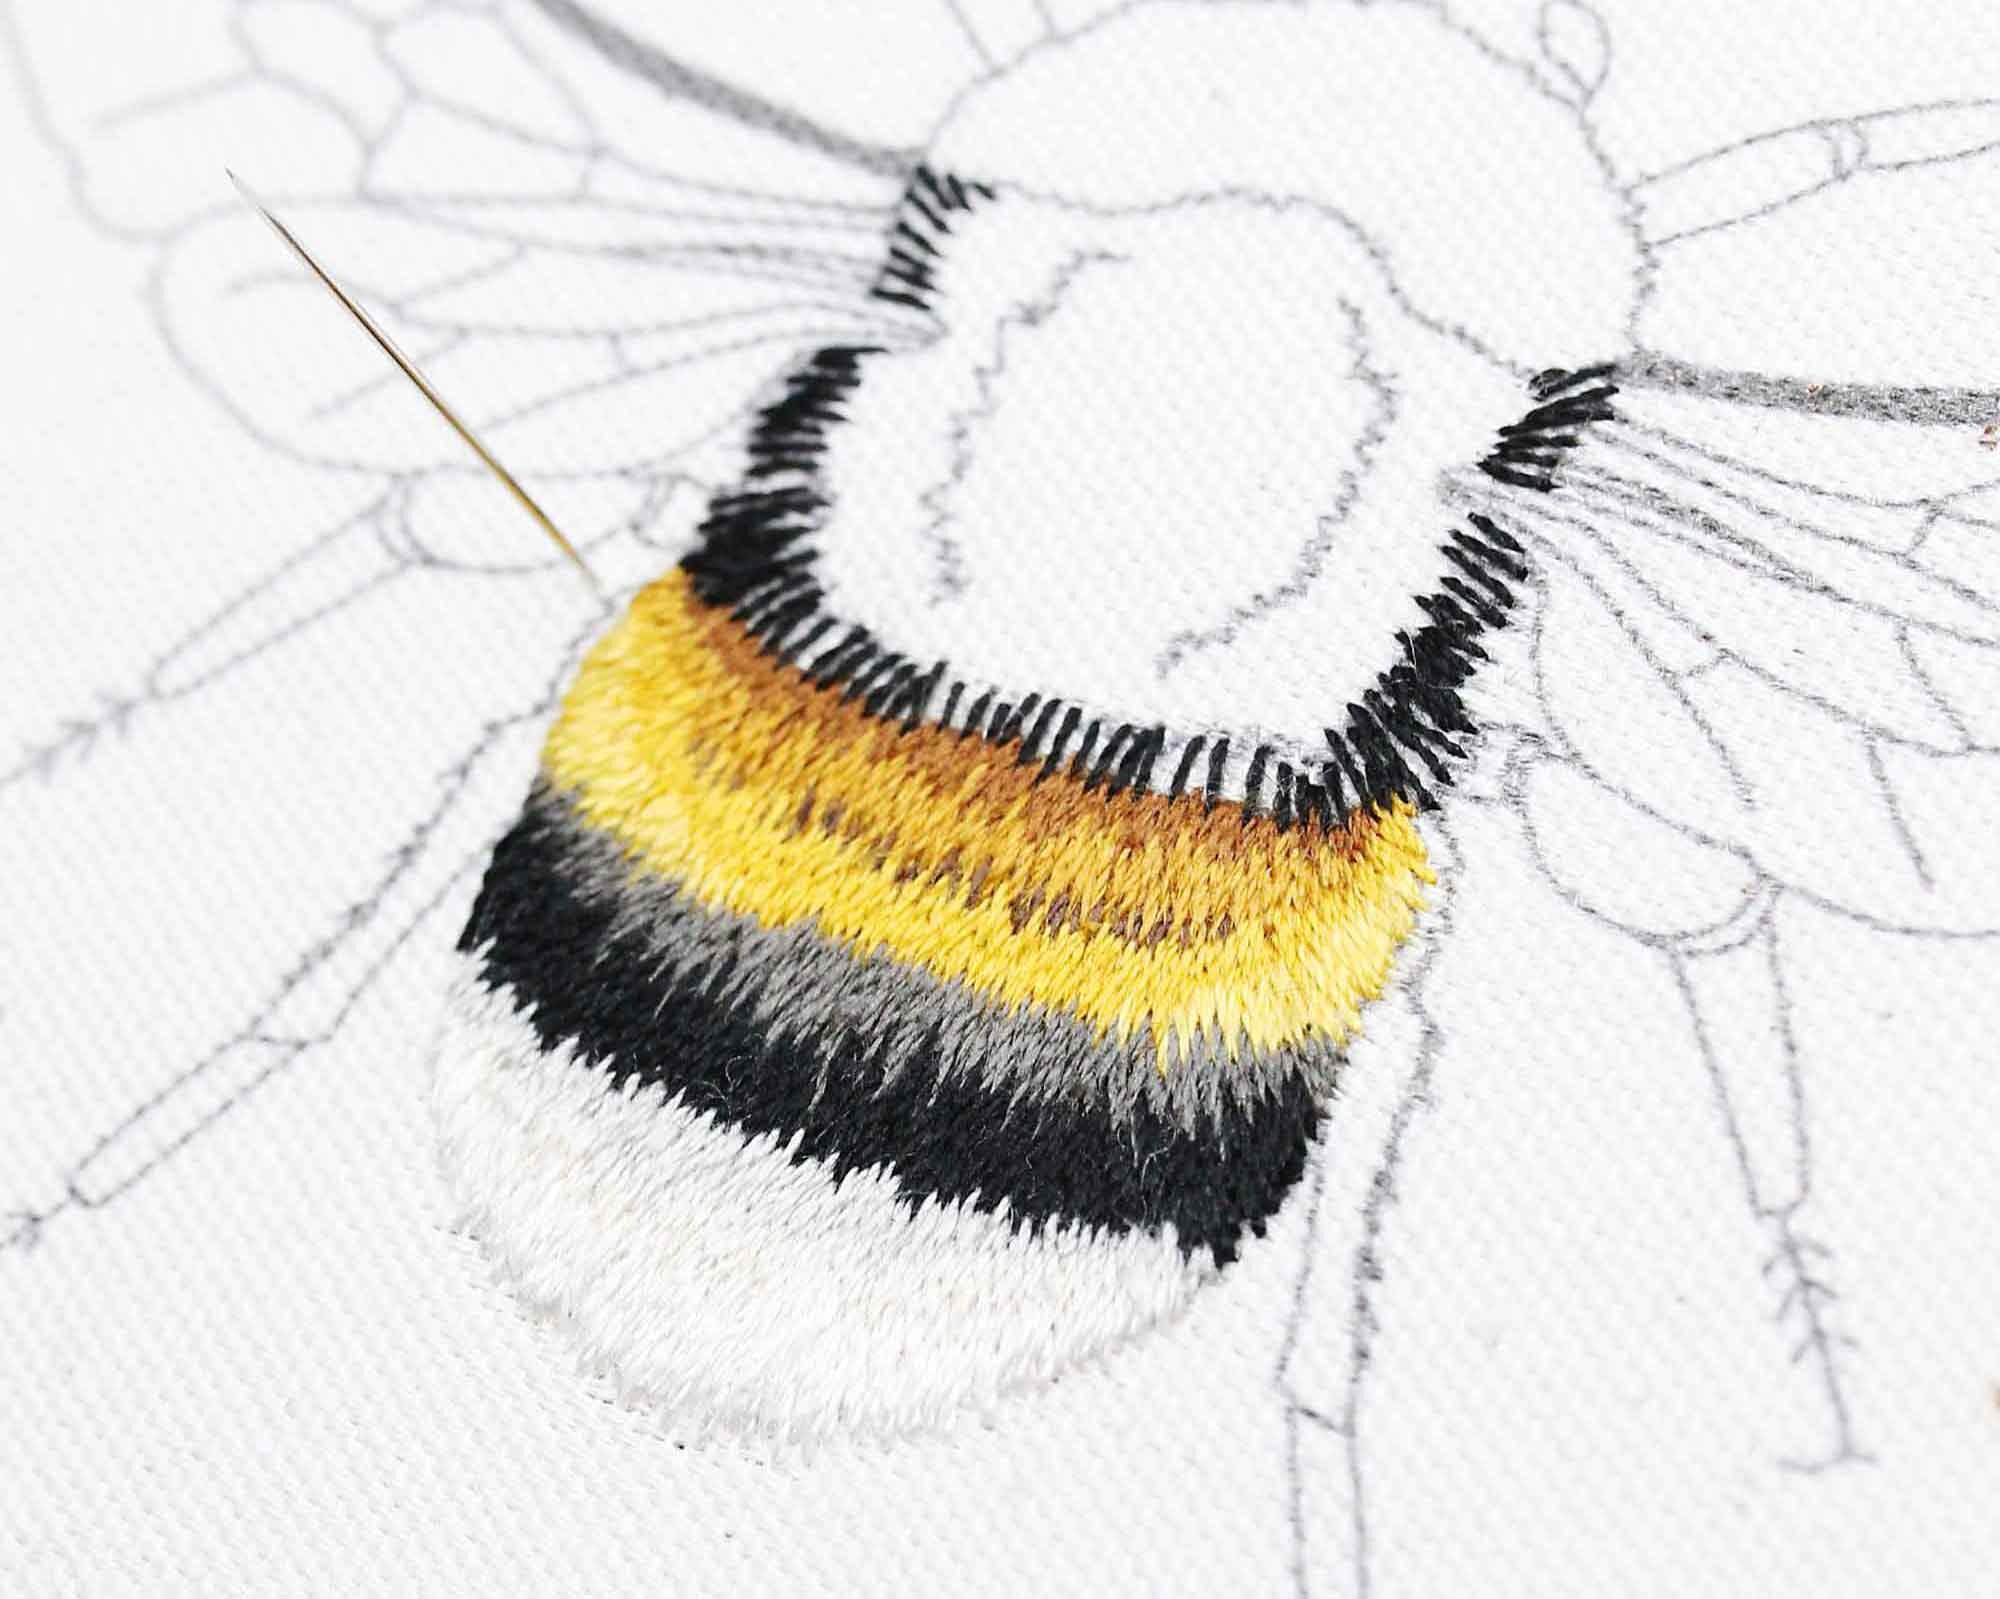 Buzzing Bees Embroidery Transfer Sheet Pattern - 18 x 24 Inch Featuring 14  Designs